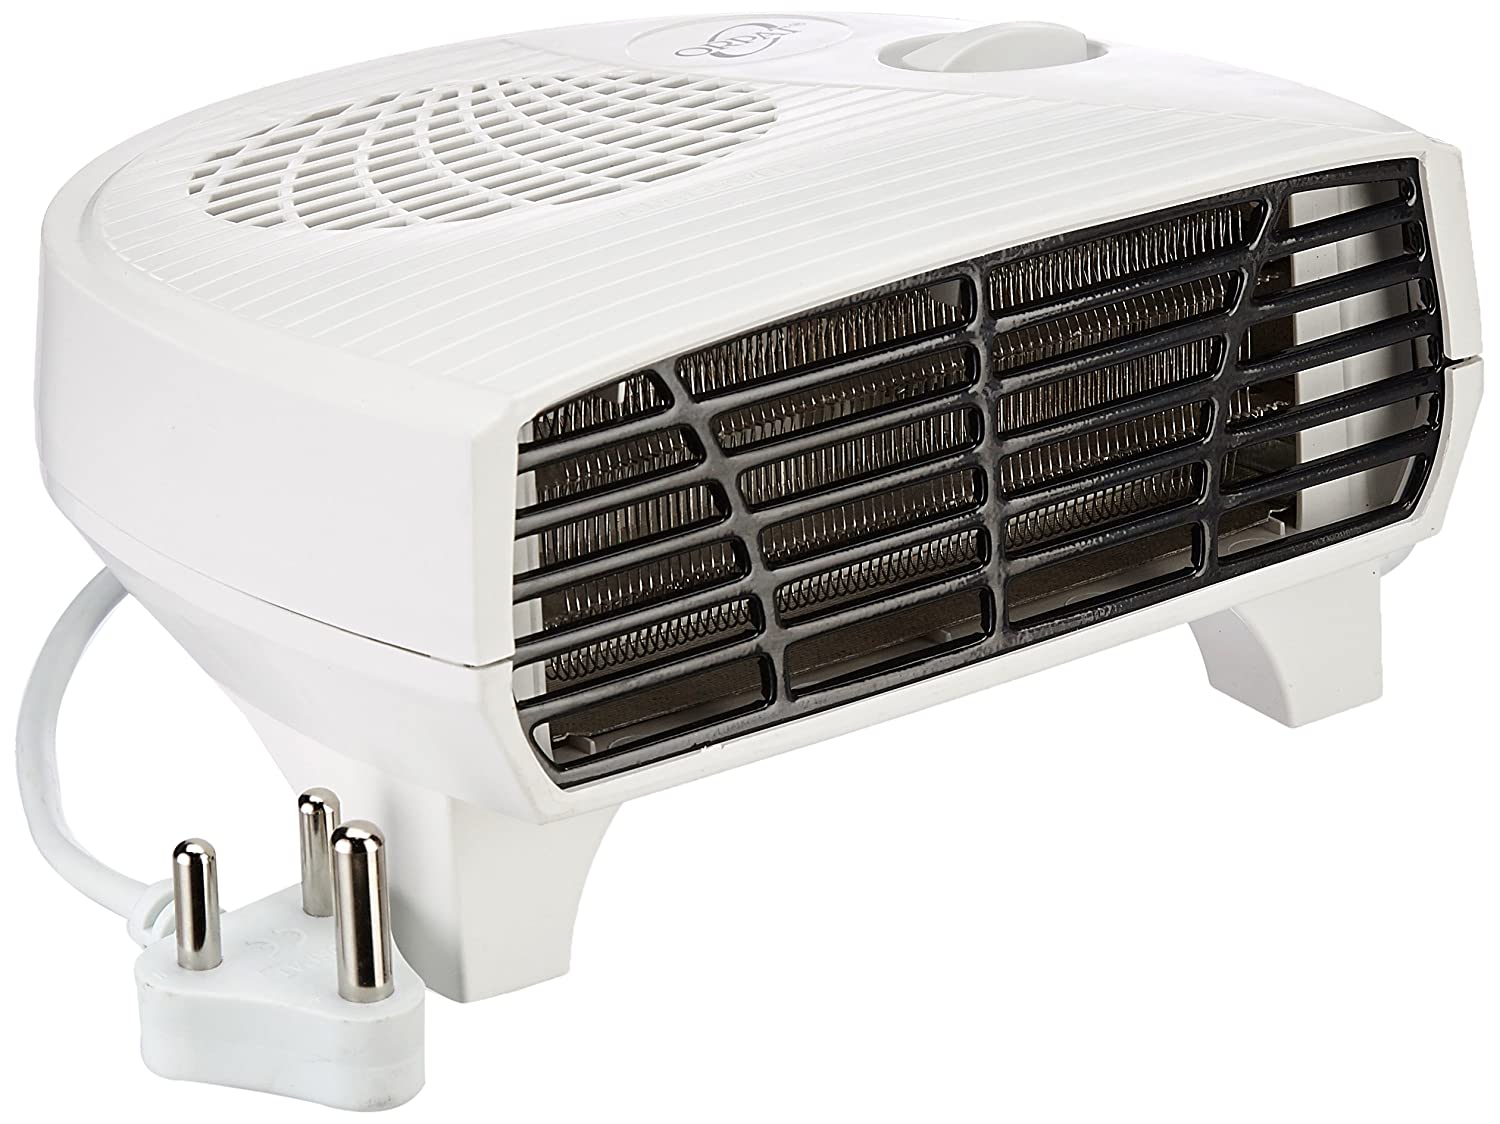 Amazon Deal: Want To Buy Good Blower To Save Yourself From Cold Wave?  Check Out Best Brands